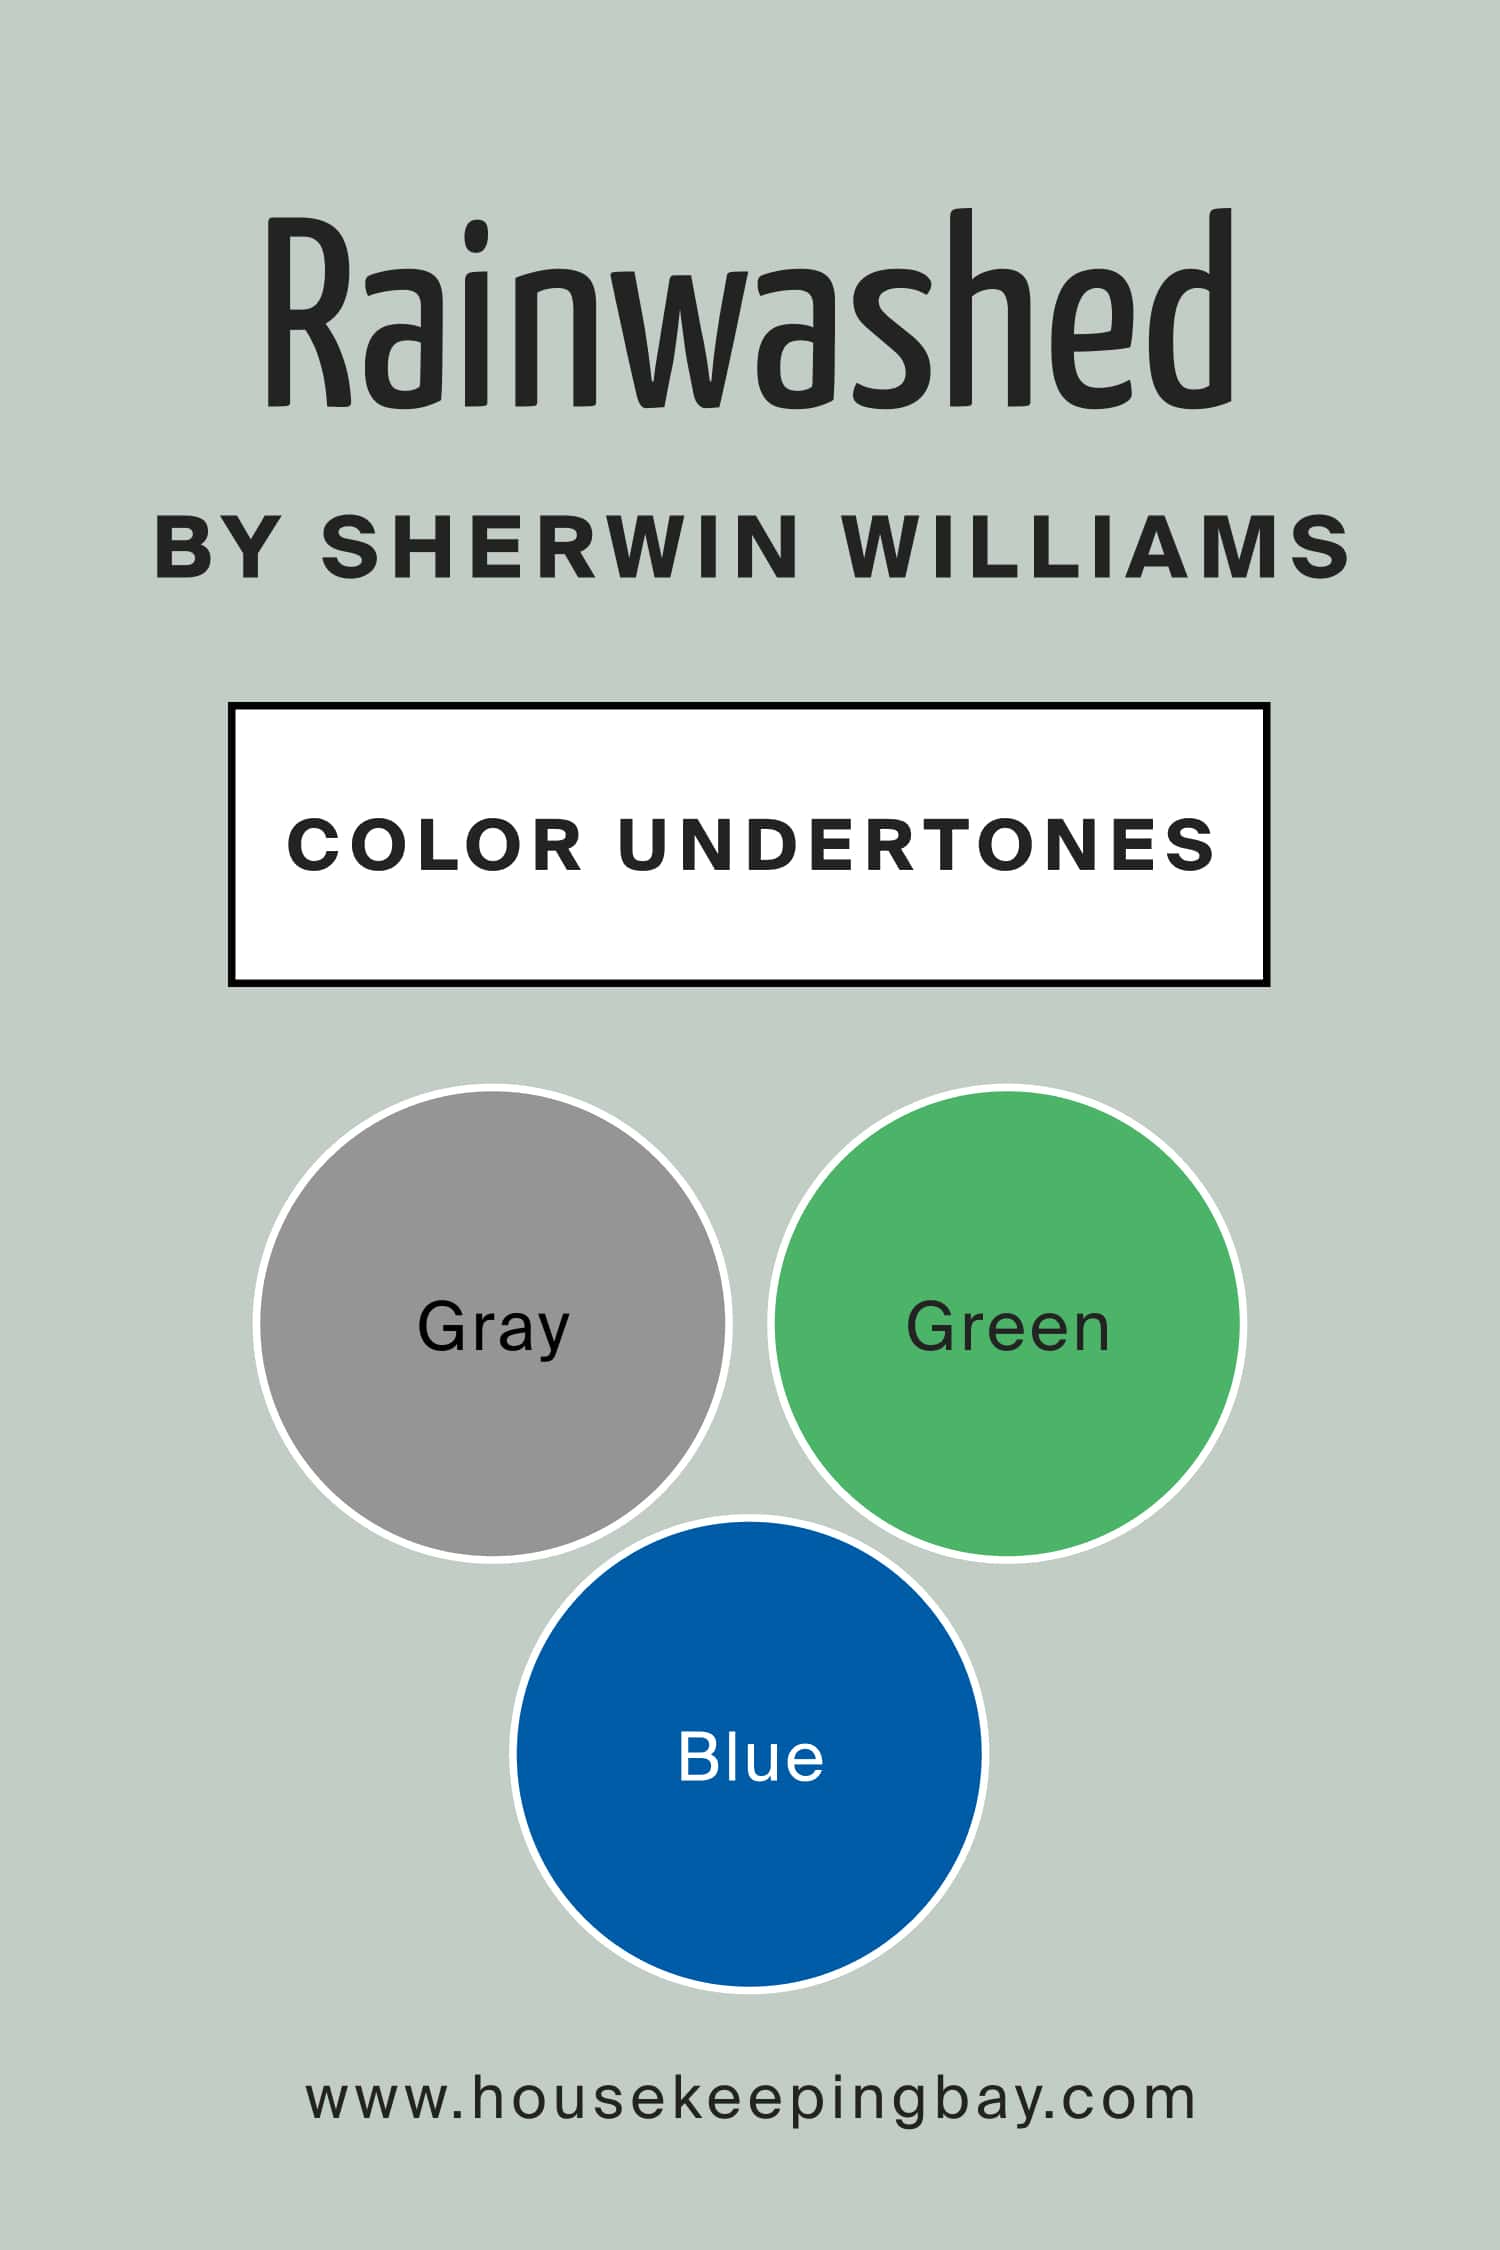 Rainwashed t by Sherwin Williams Color Undertones